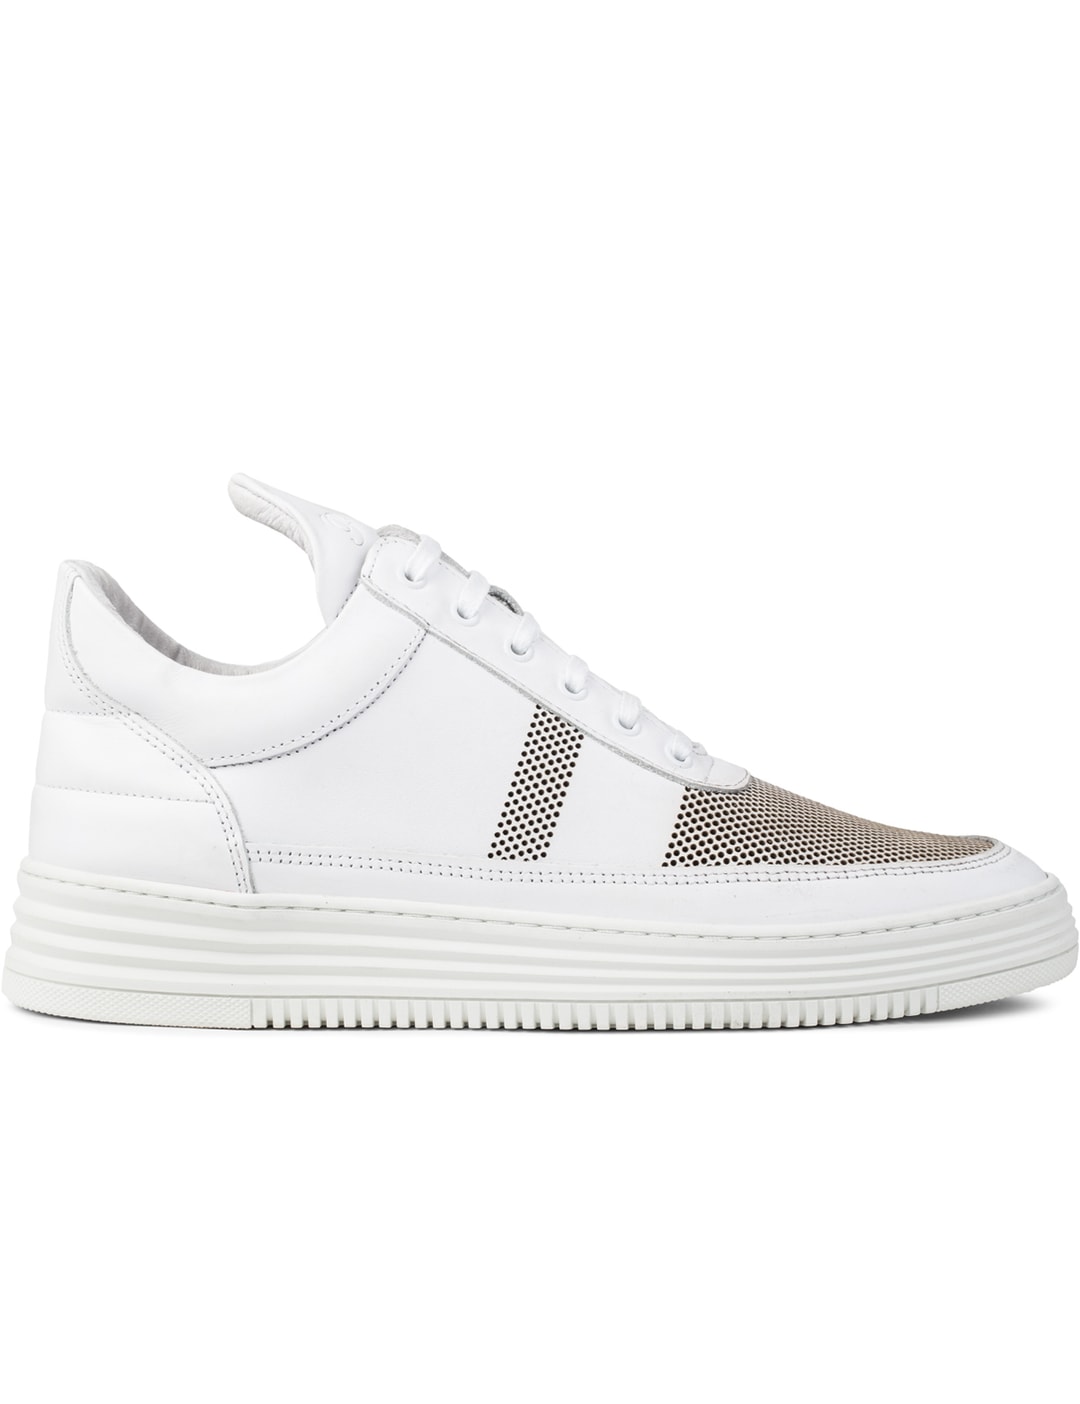 Filling Pieces - Stripe Perforated Low Top Sneakers | HBX - Globally ...